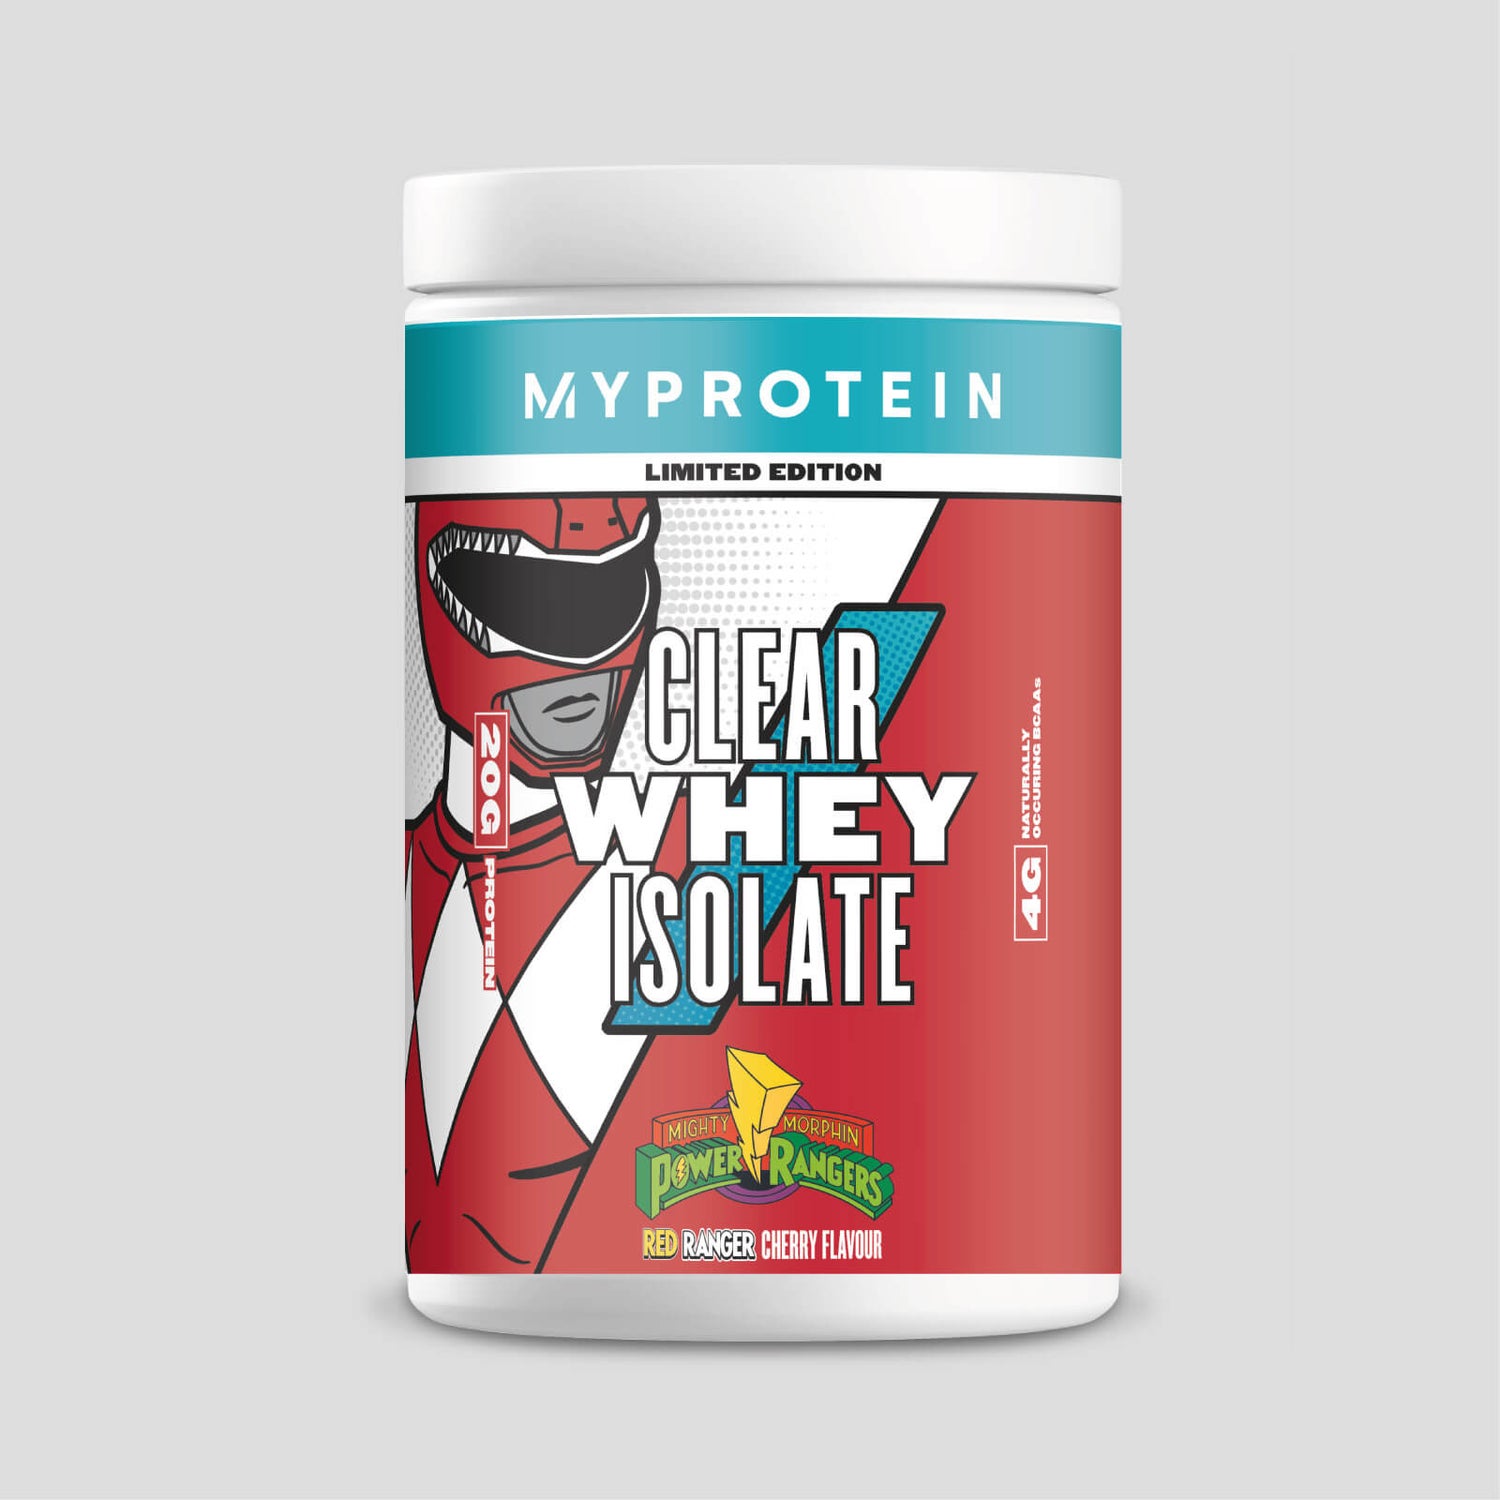 Clear Whey Isolate - Power Rangers